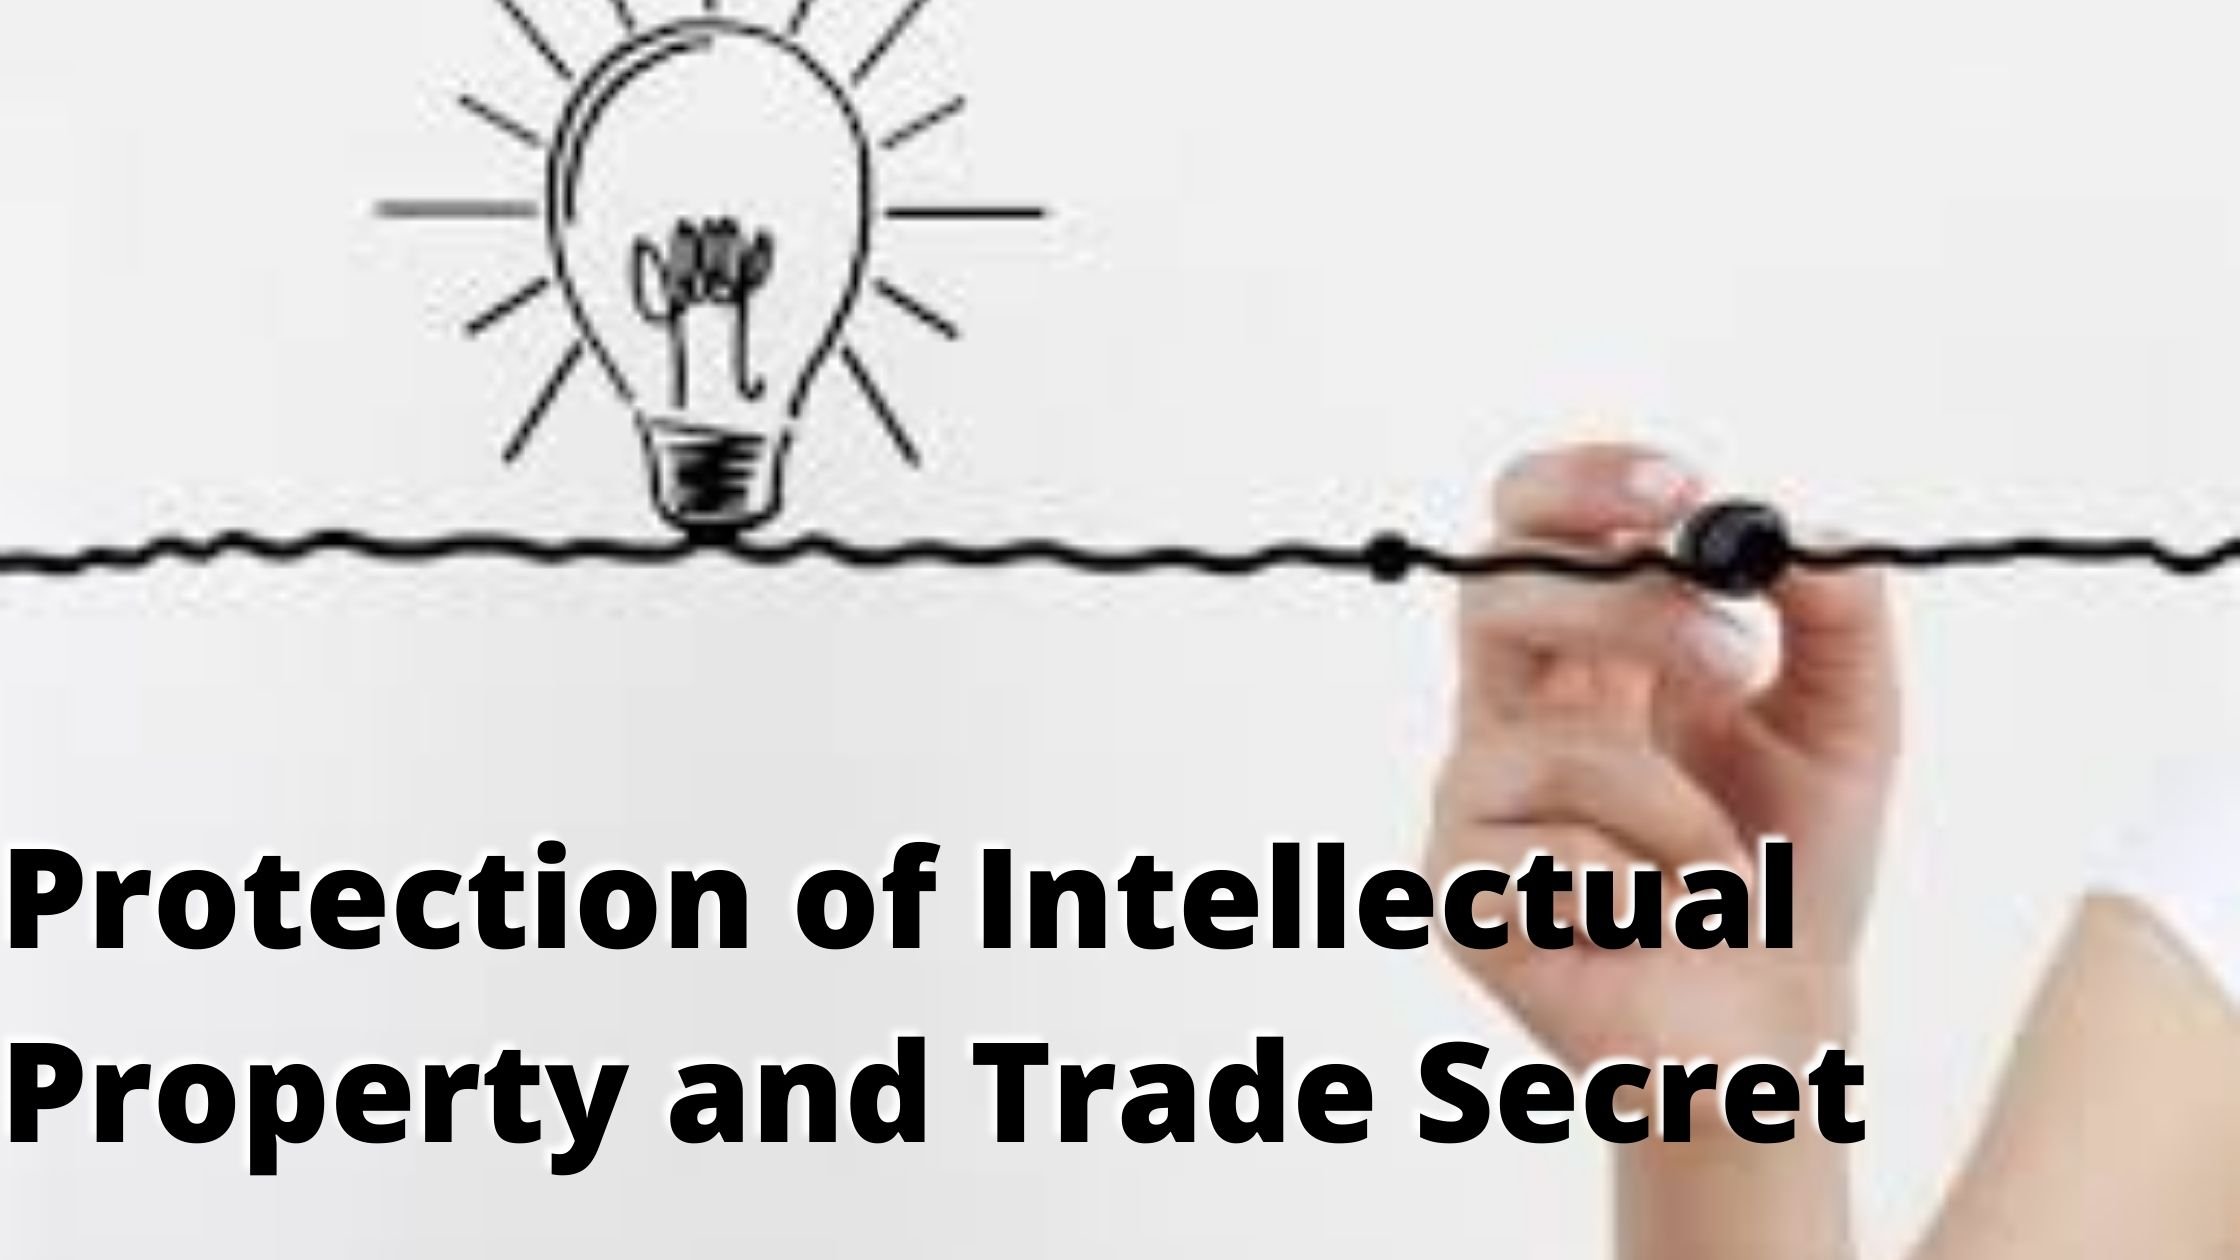 Protection of Intellectual Property and Trade Secret 